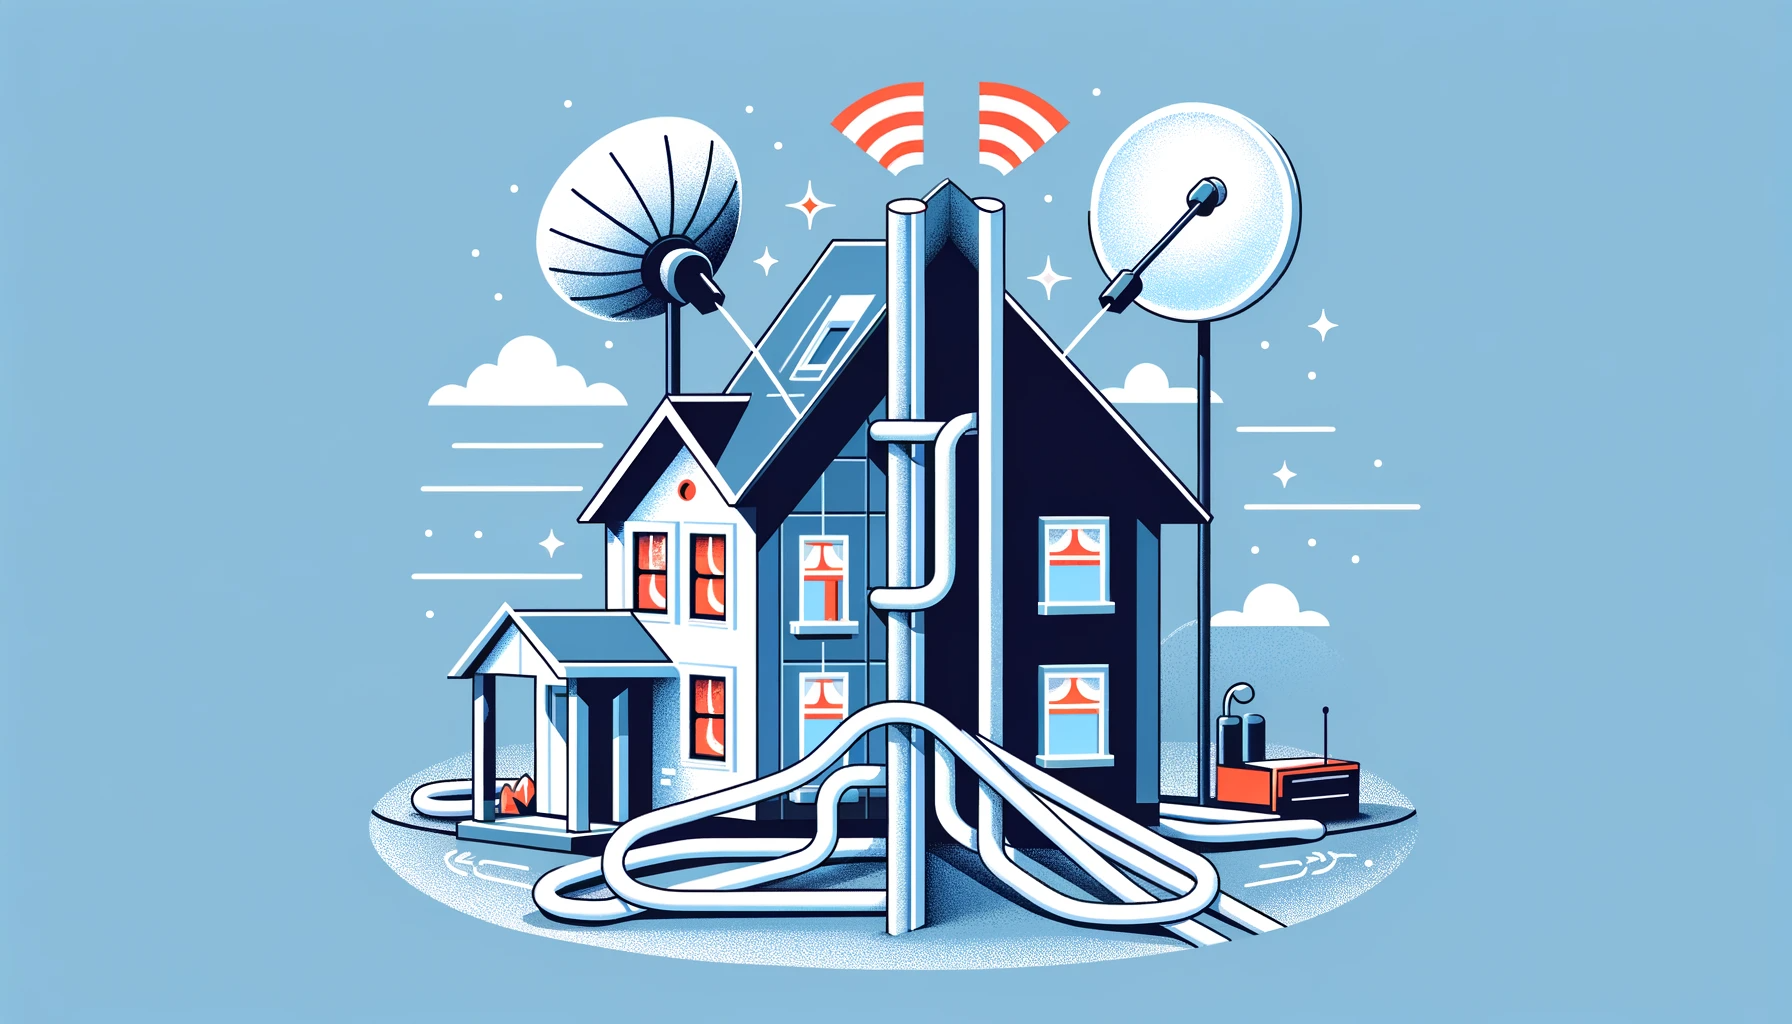 Can You Have Two Internet Providers in One House?